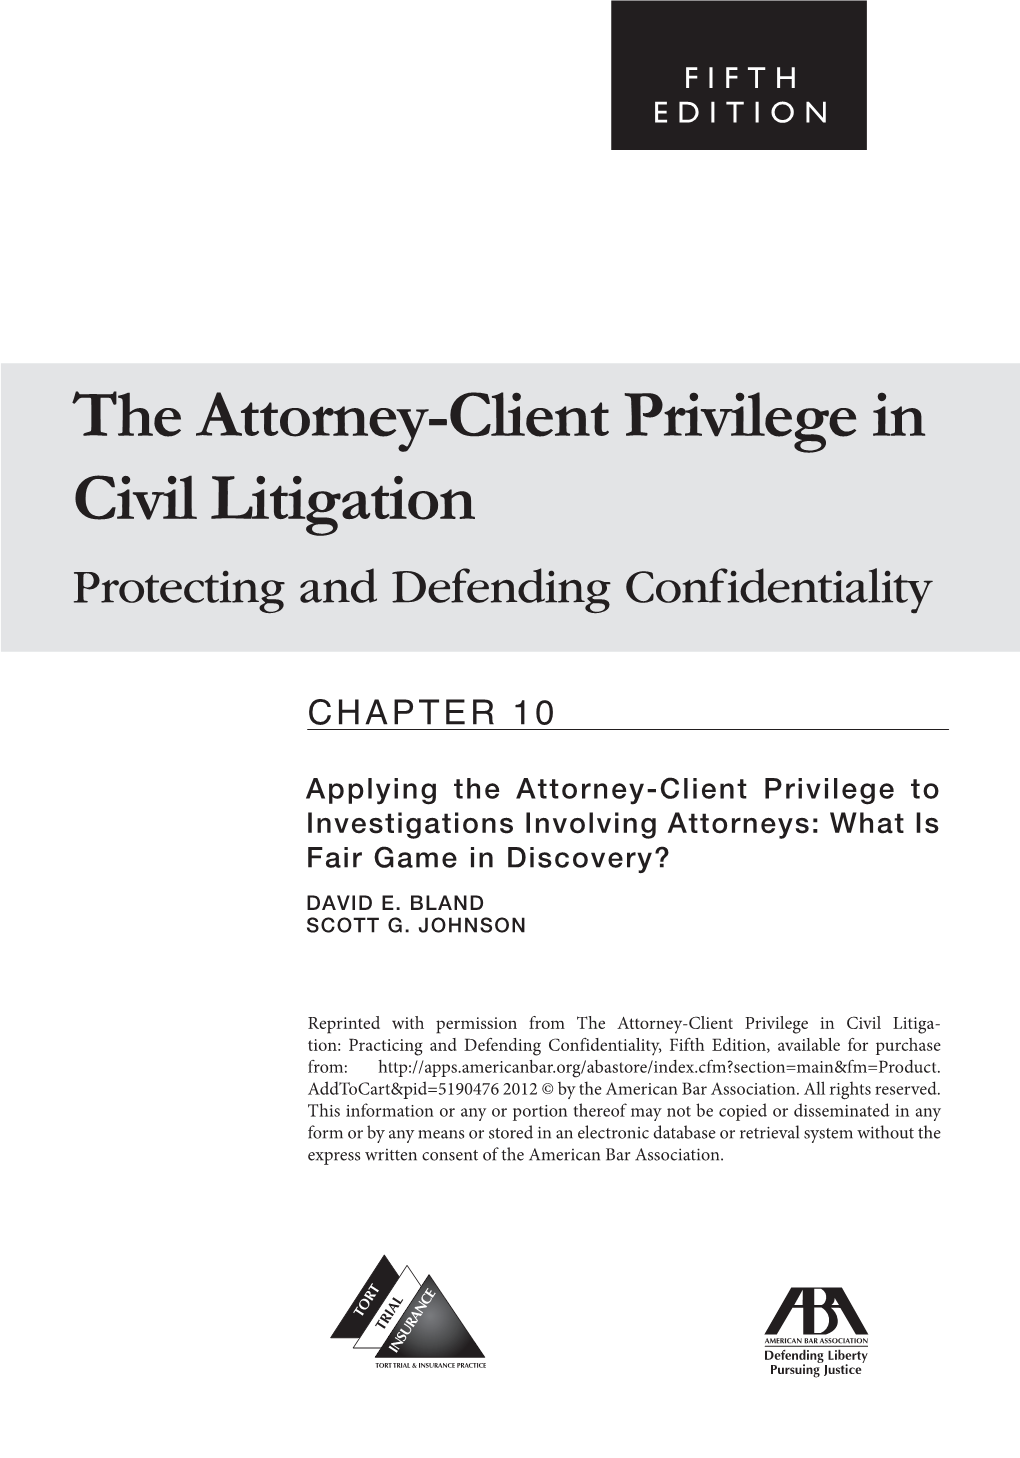 The Attorney-Client Privilege in Civil Litigation Protecting and Defending Confidentiality